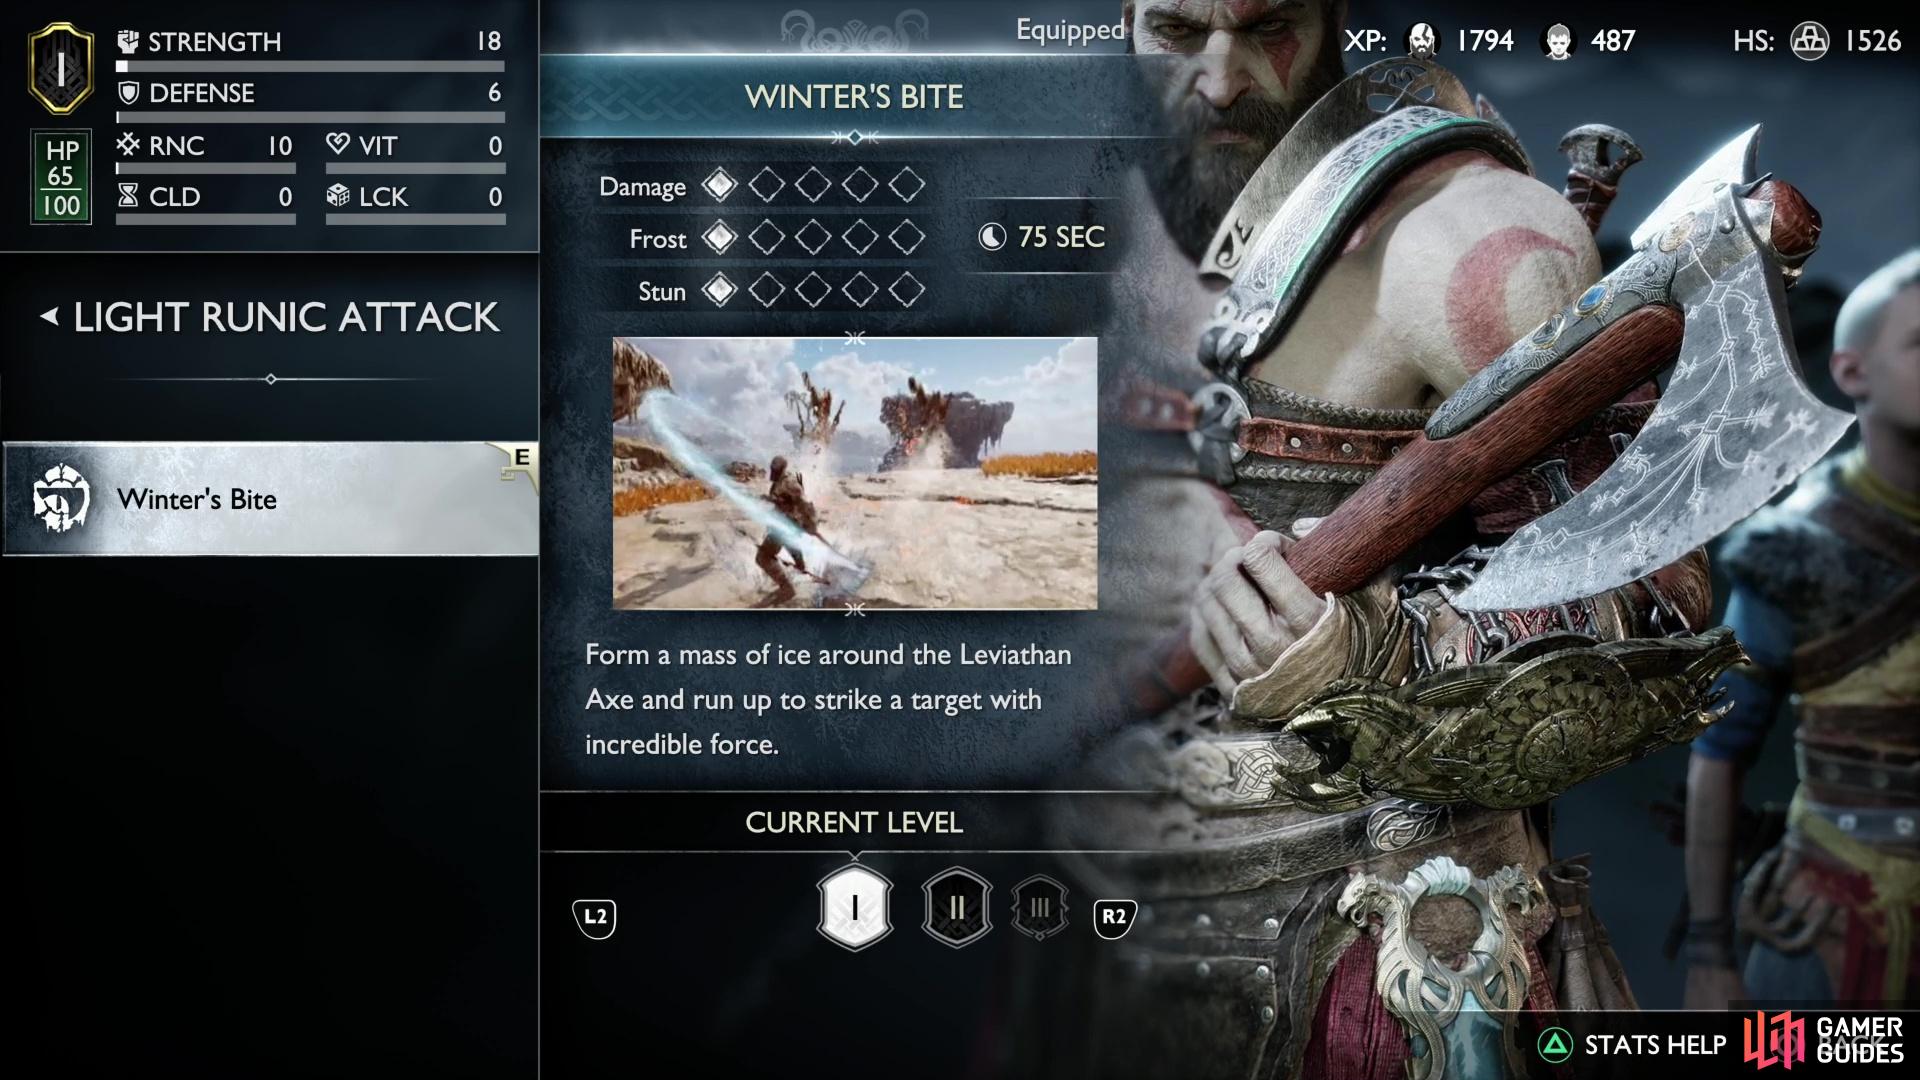 Runic Attacks are special attacks tied to one of Kratos’ weapons. You can equip one Heavy Runic Attack and one Light Runic Attack to each weapon.